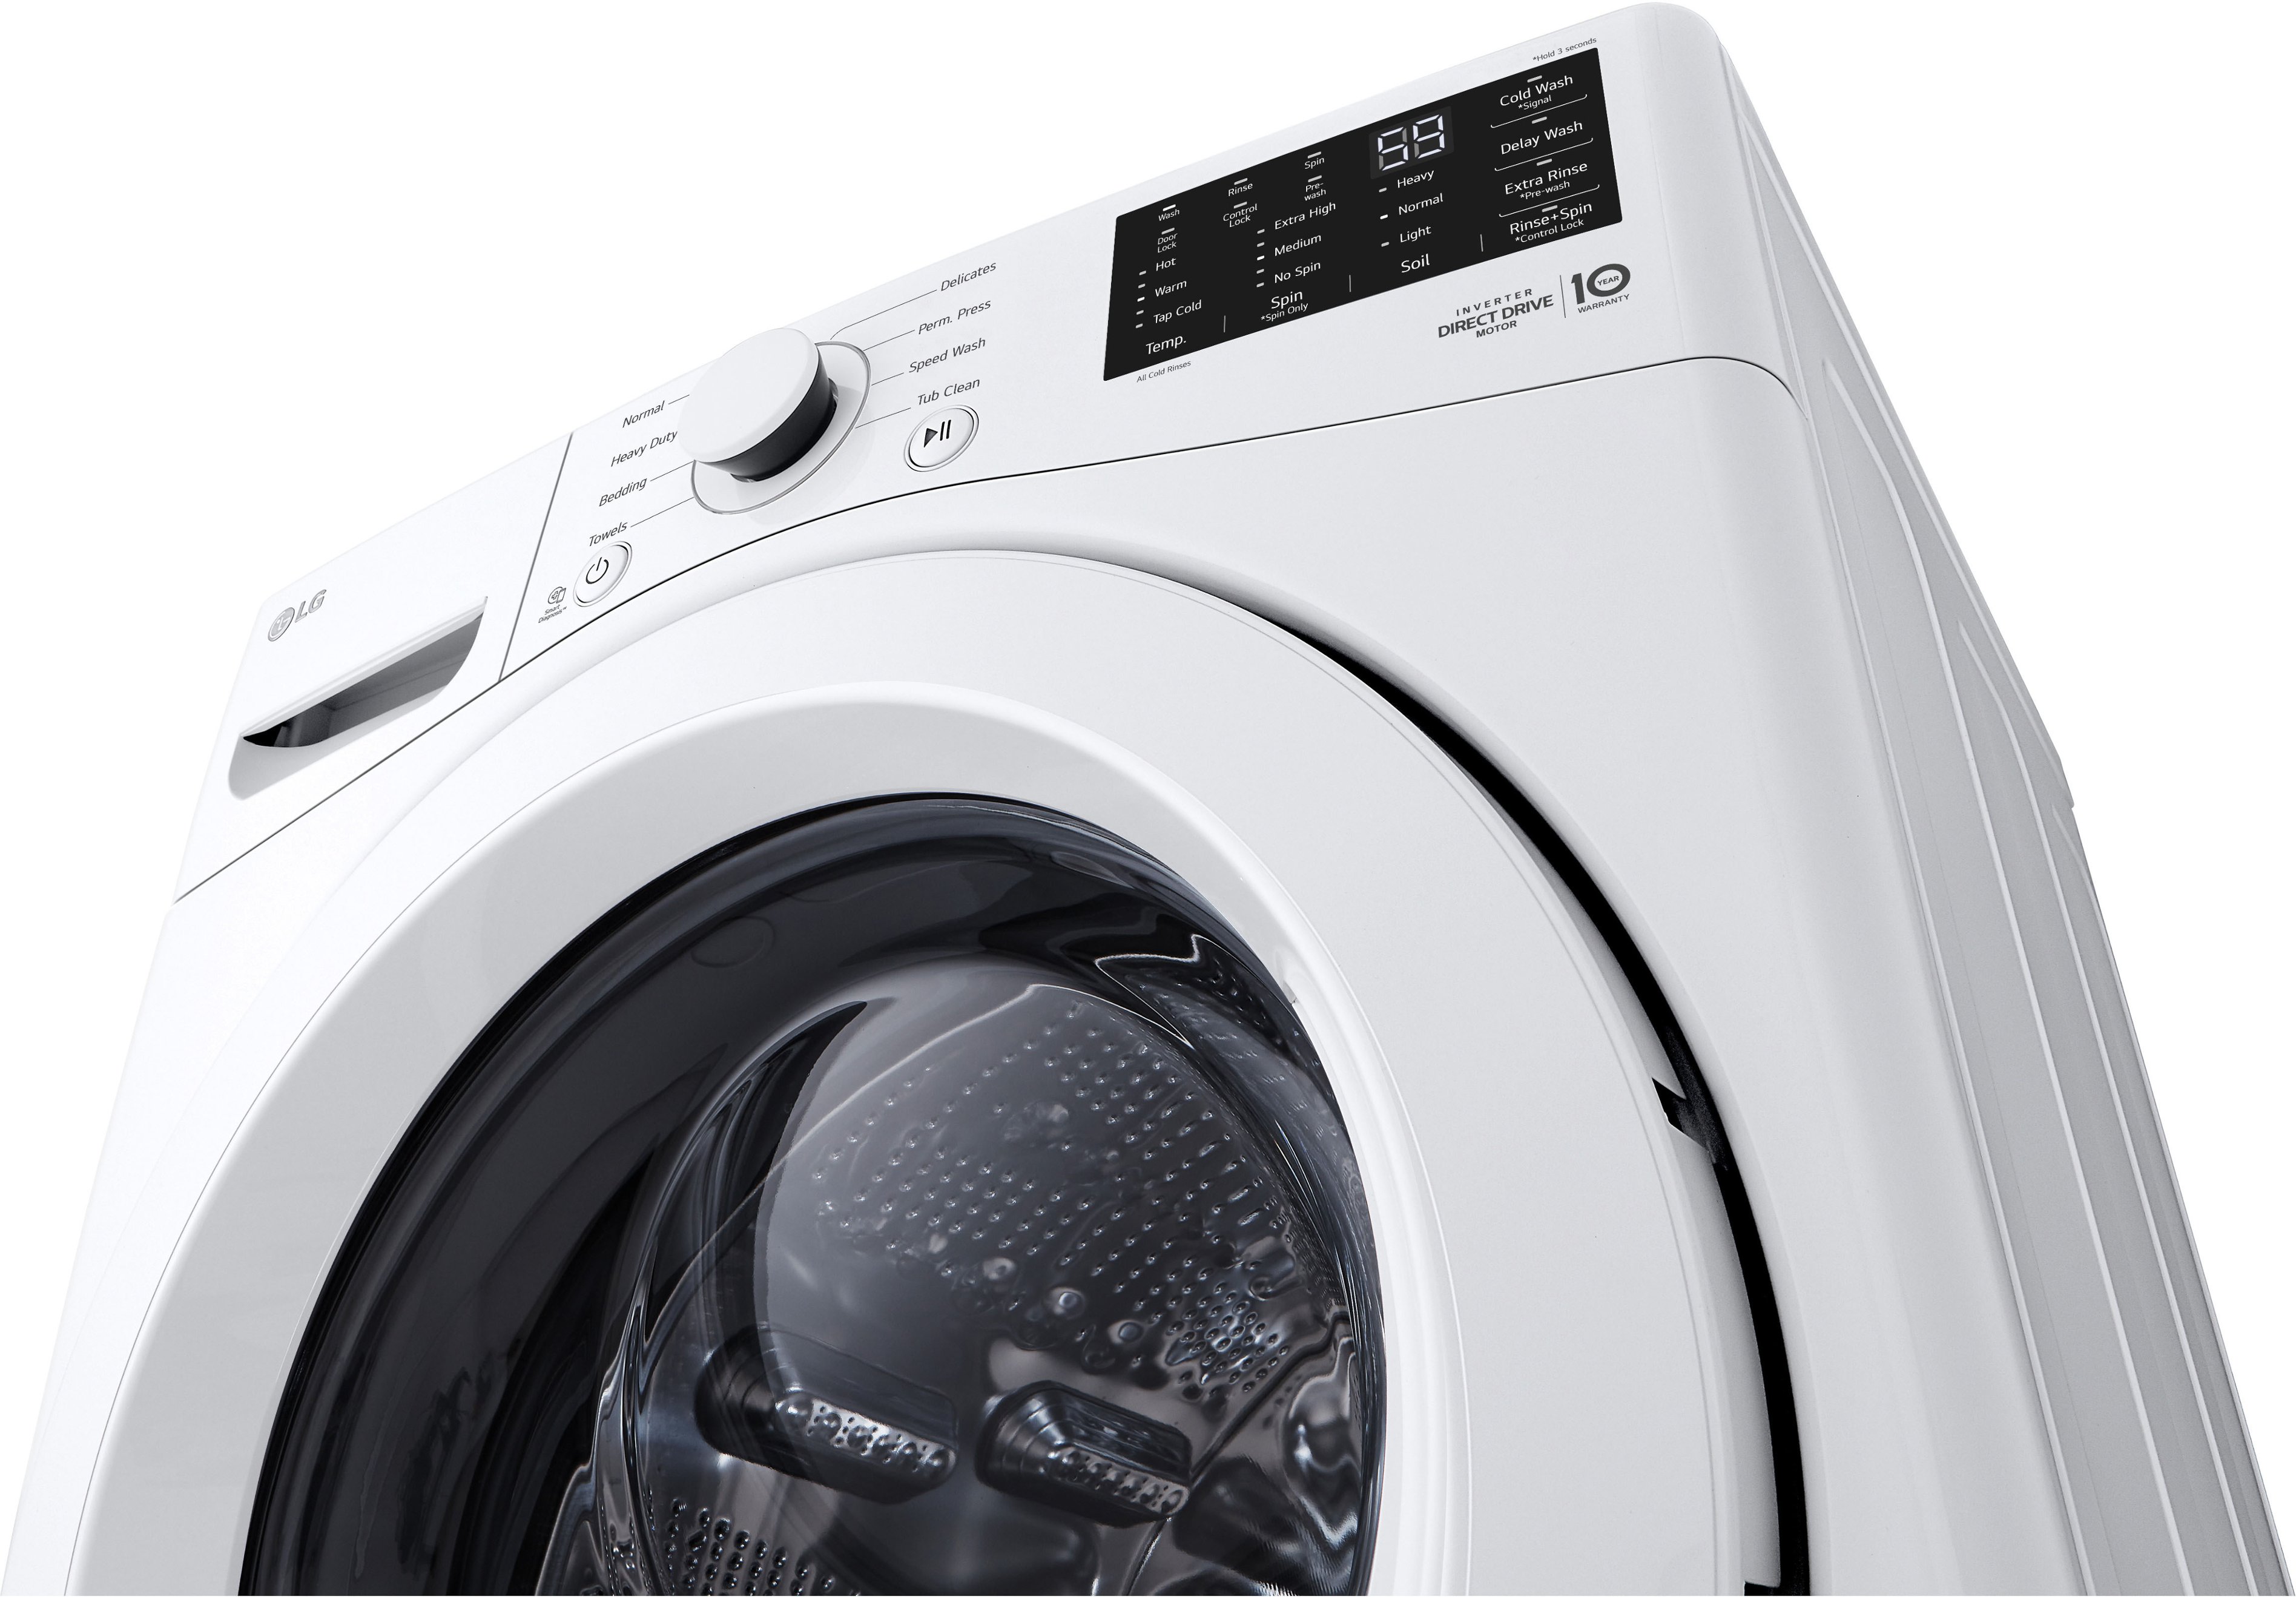 LG 5.0 Cu. Ft. White Best Buy High-Efficiency Washer - WM3470CW with Load Technology 6Motion Front